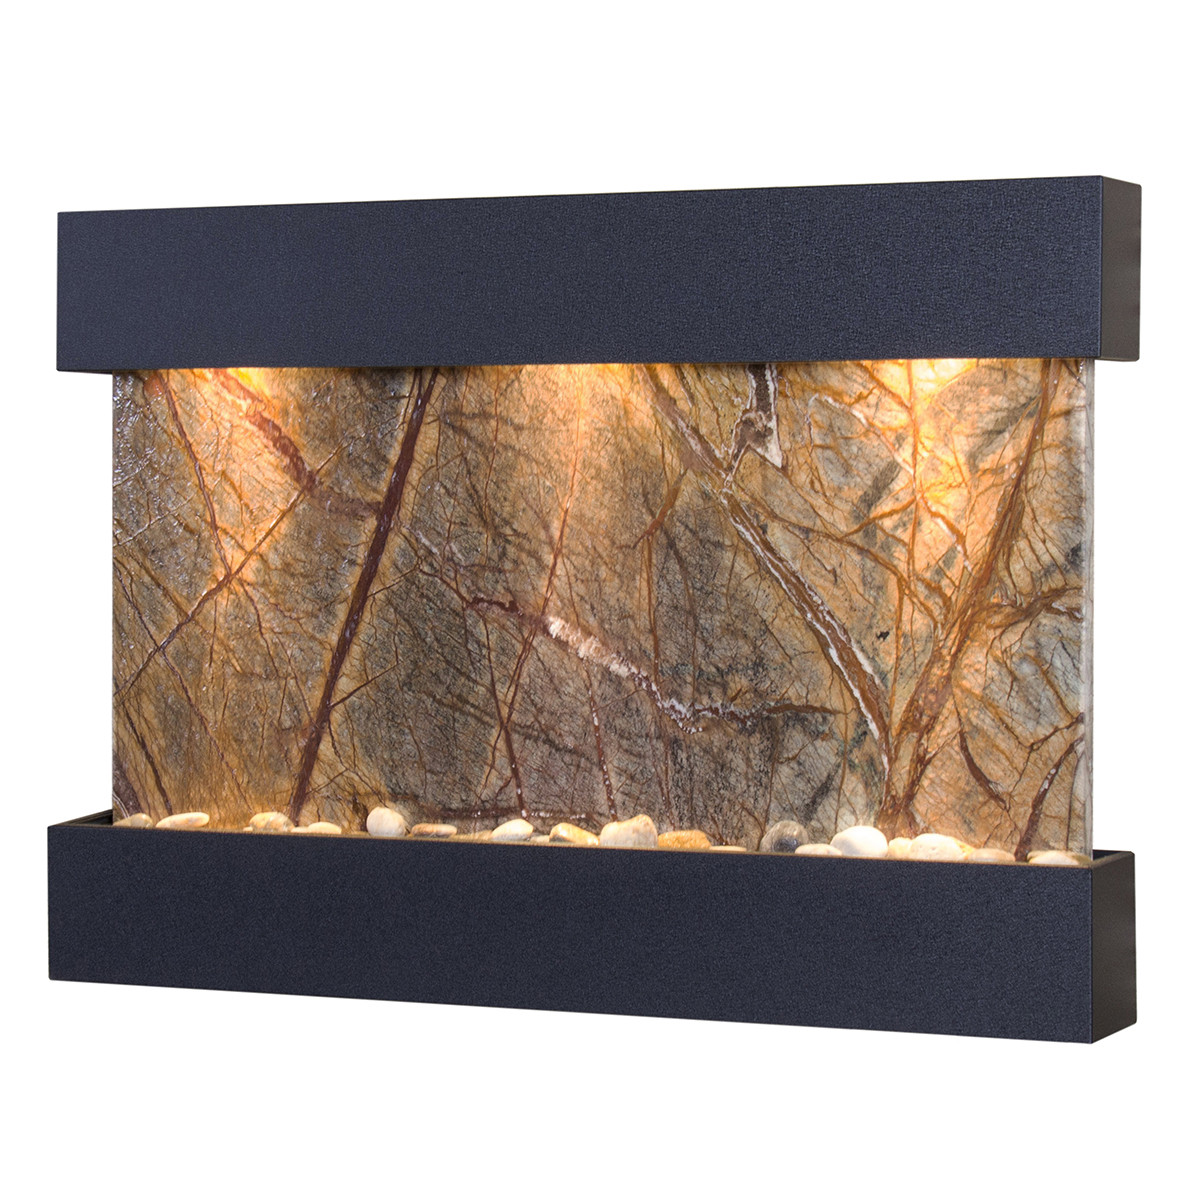 Adagio RCS1706 Reflection Creek Textured Black Brown-Marble Wall Fountain - image 2 of 2